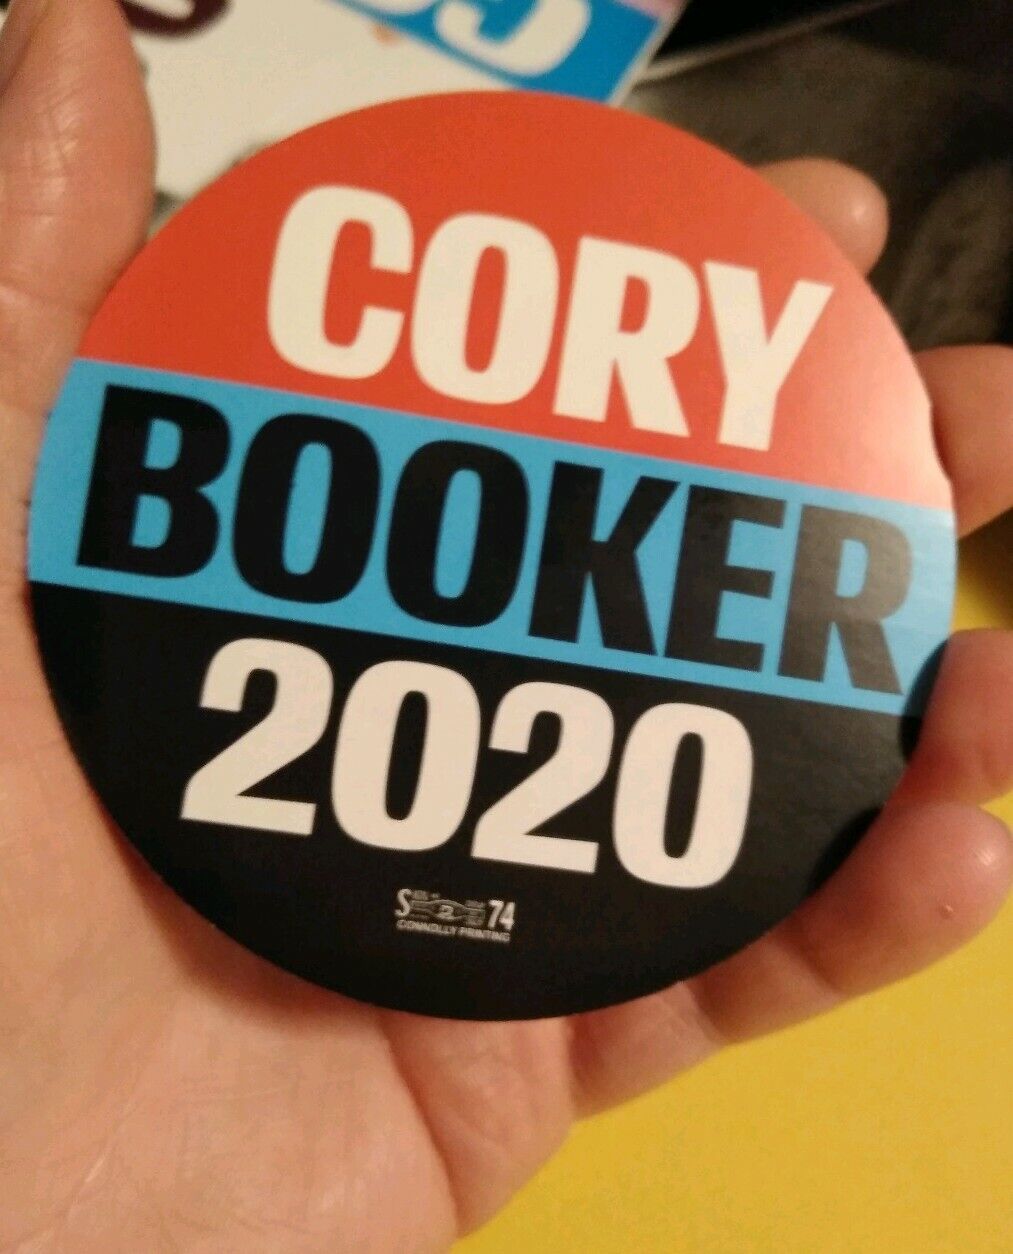 Cory Booker 2020 Presidential Candidate Official Campaign bumper Sticker.